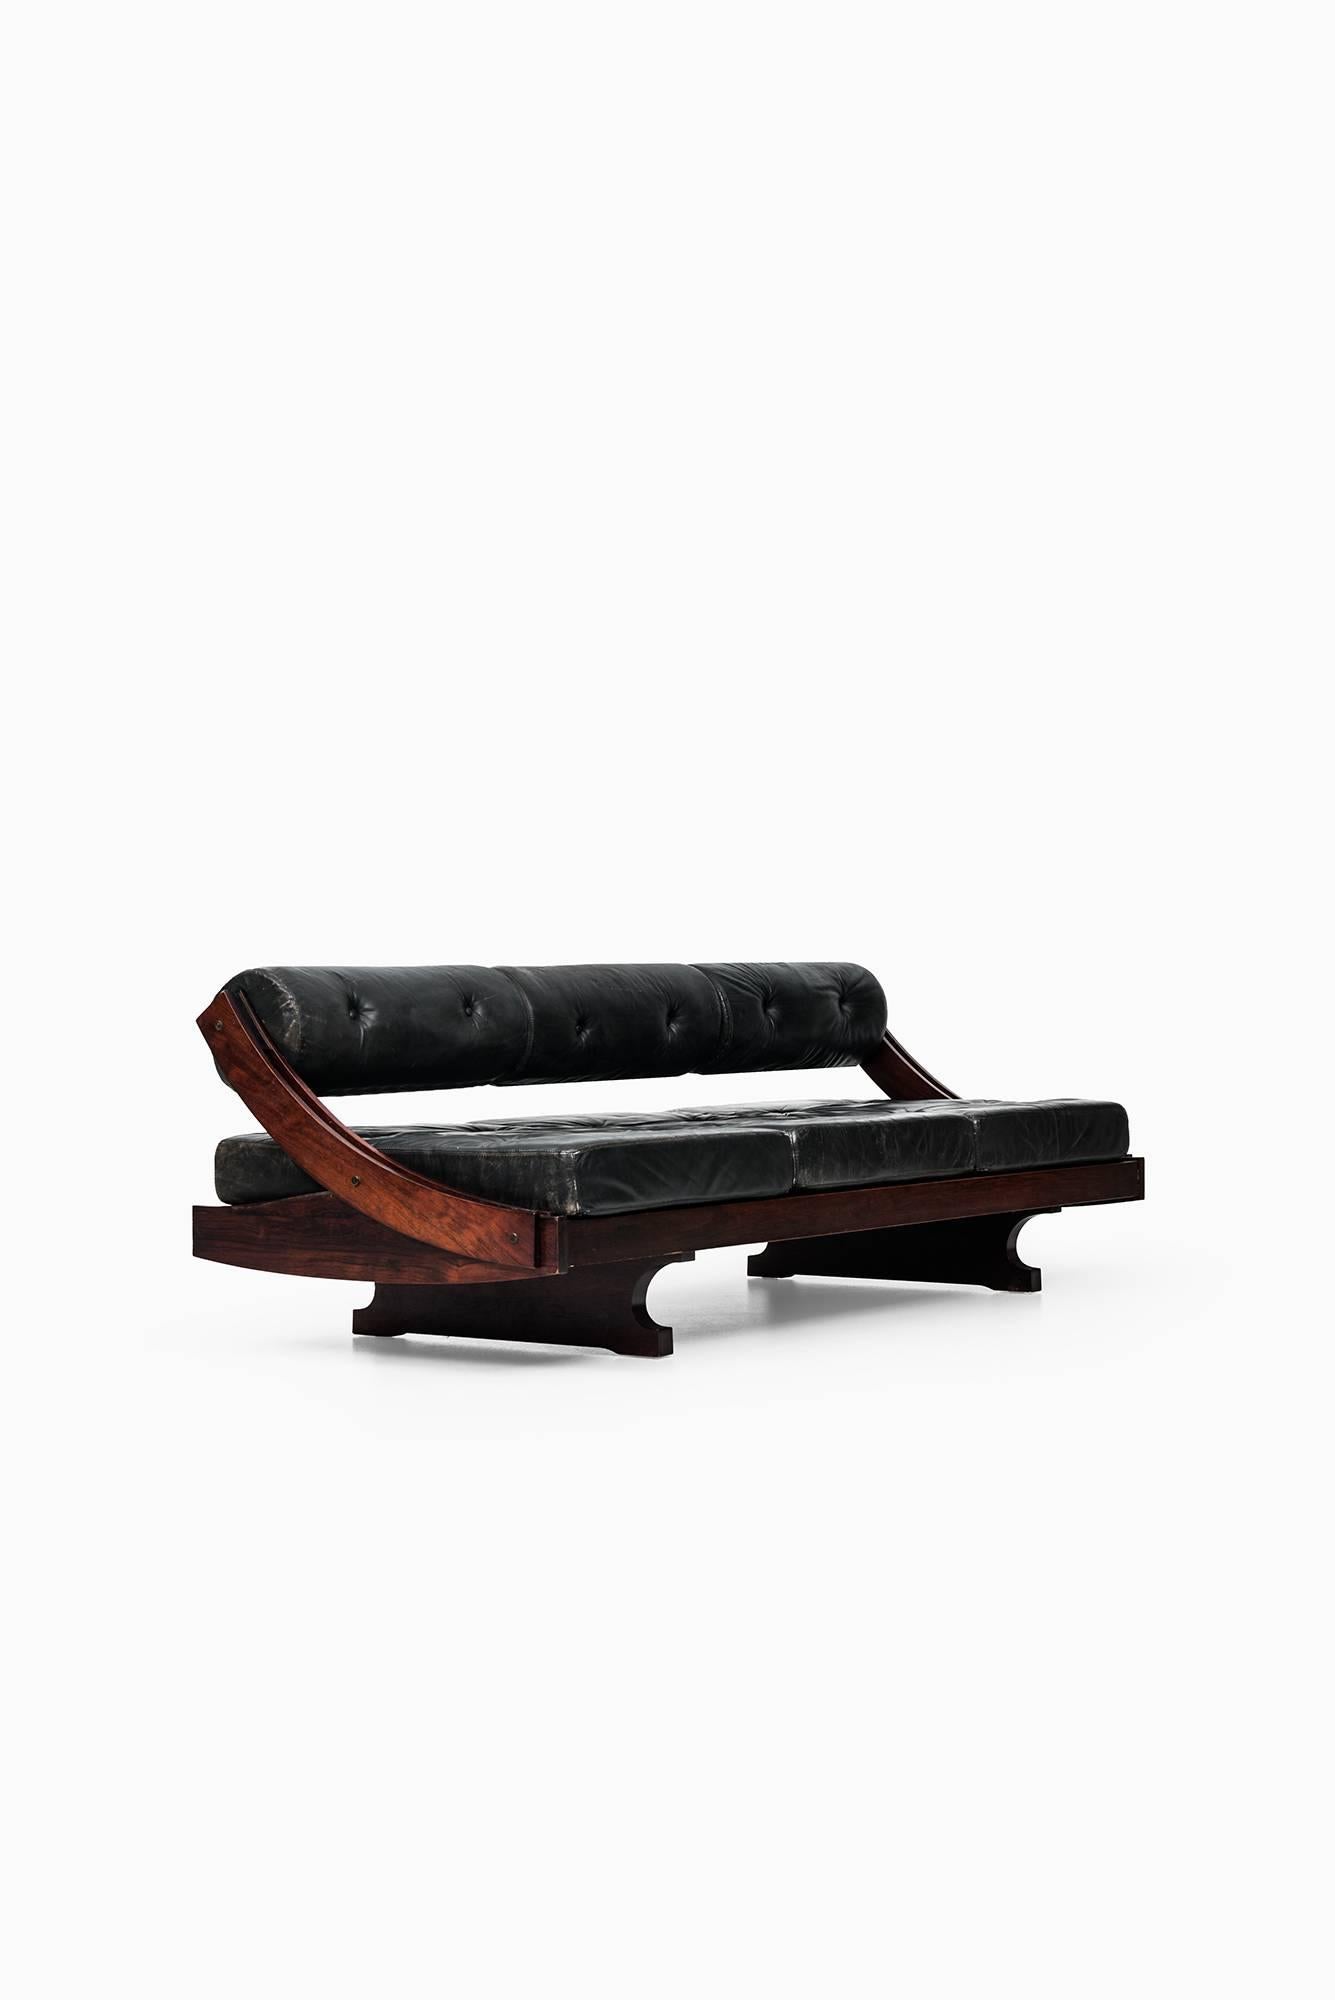 Leather Gianni Songia Daybed / Sofa Model GS 195 by Sormani in Italy For Sale